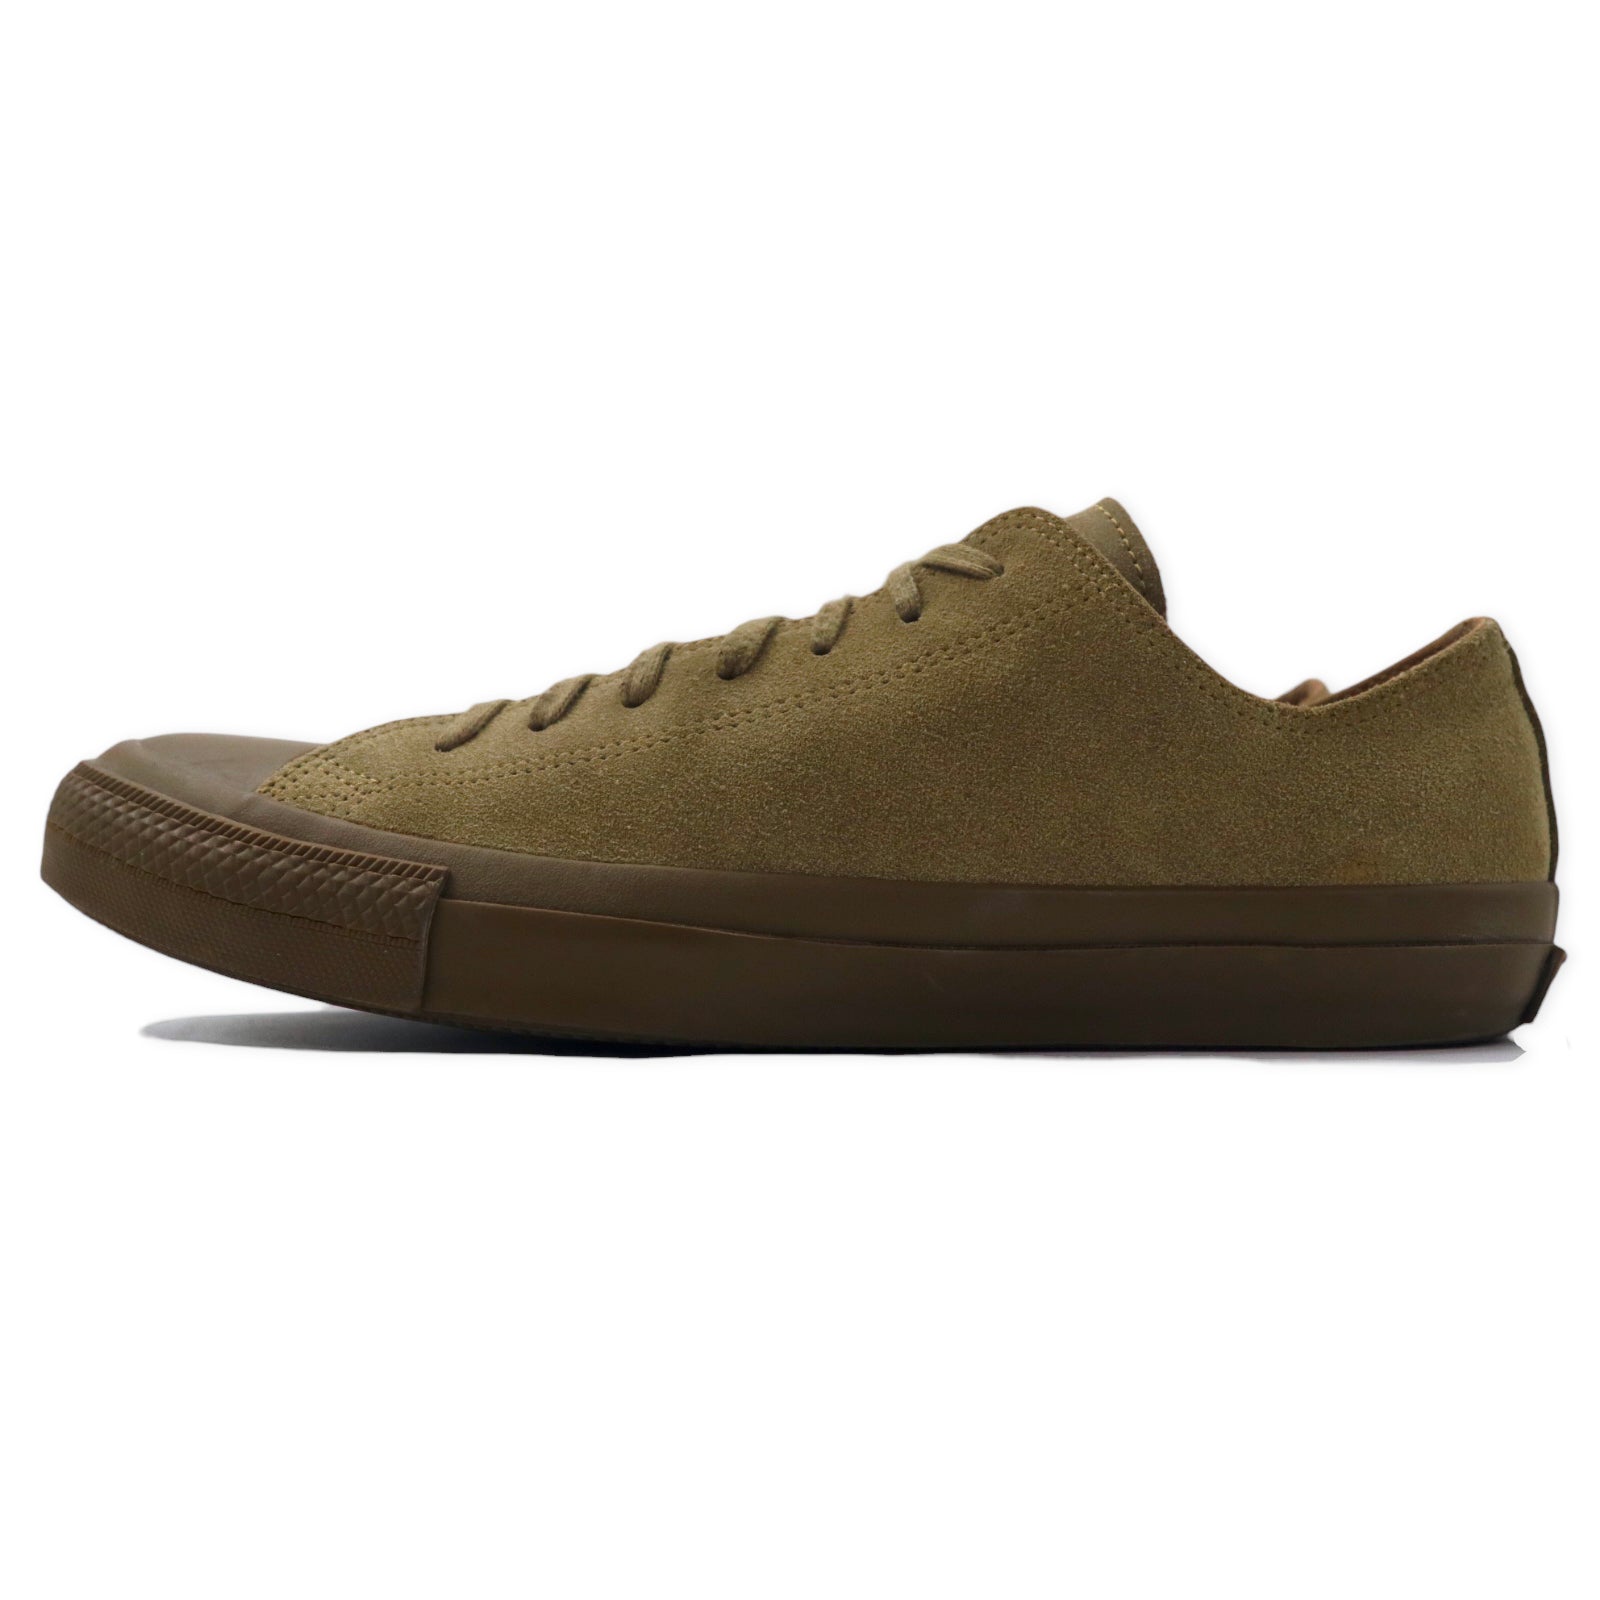 CONVERSE TOKYO × CLANE All -Star Sneakers US10 Beige SUEDE Leather 